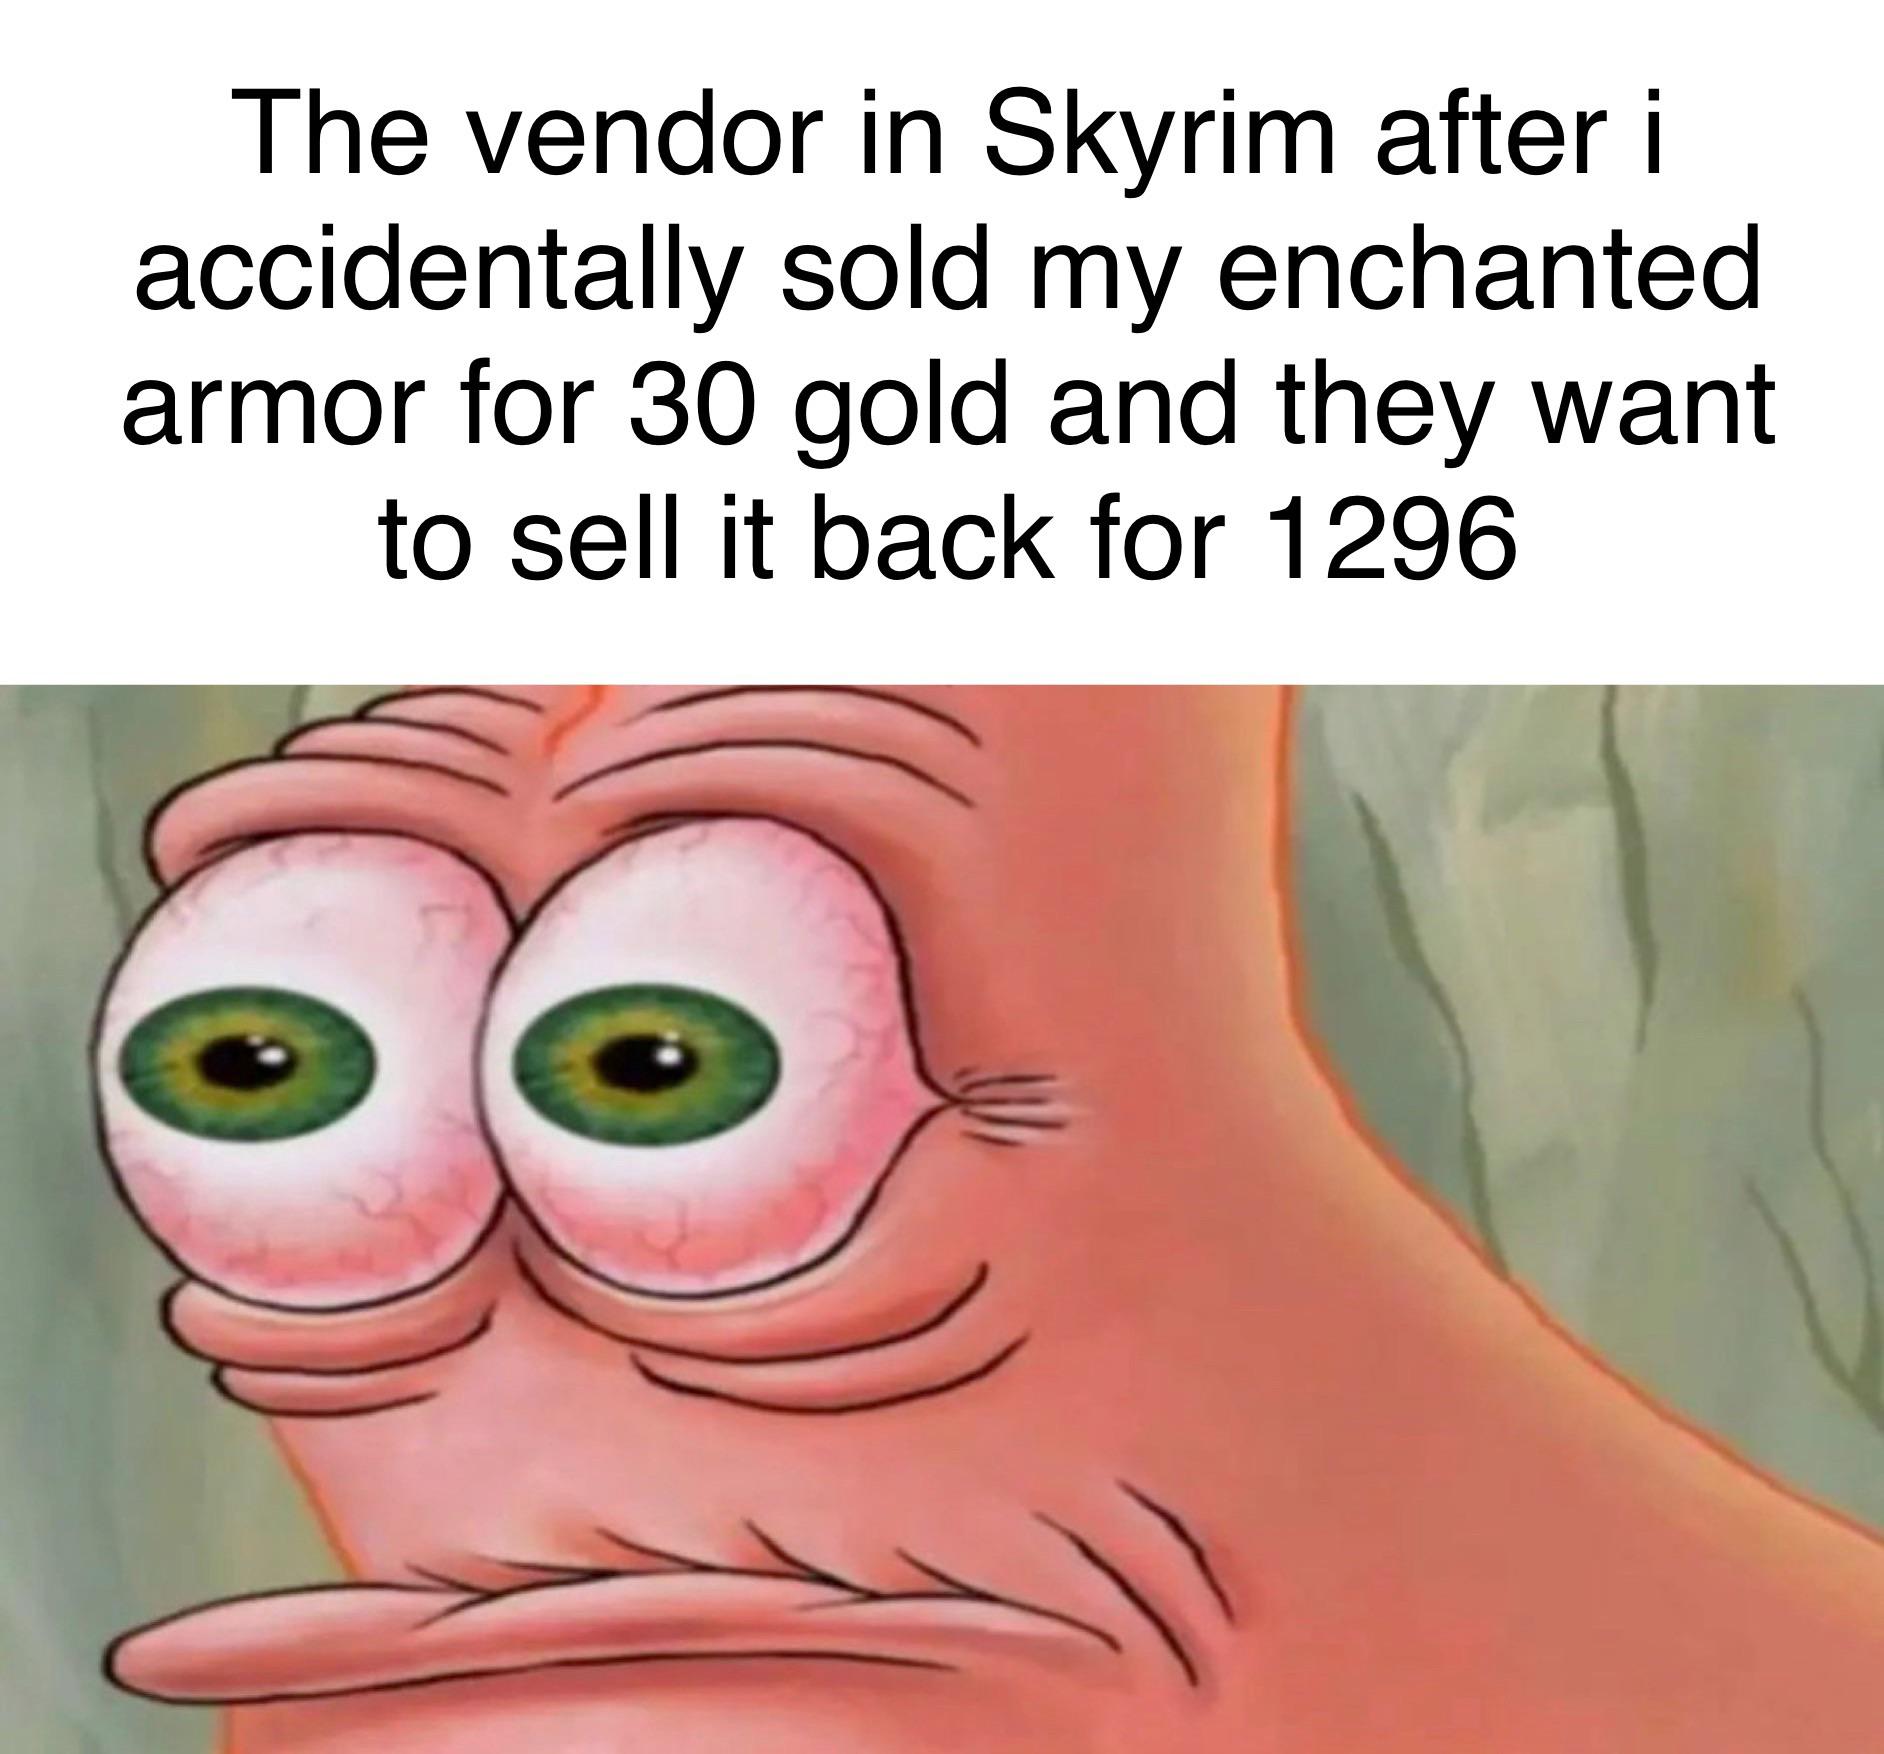 funny memes - Meme - The vendor in Skyrim after i accidentally sold my enchanted armor for 30 gold and they want to sell it back for 1296